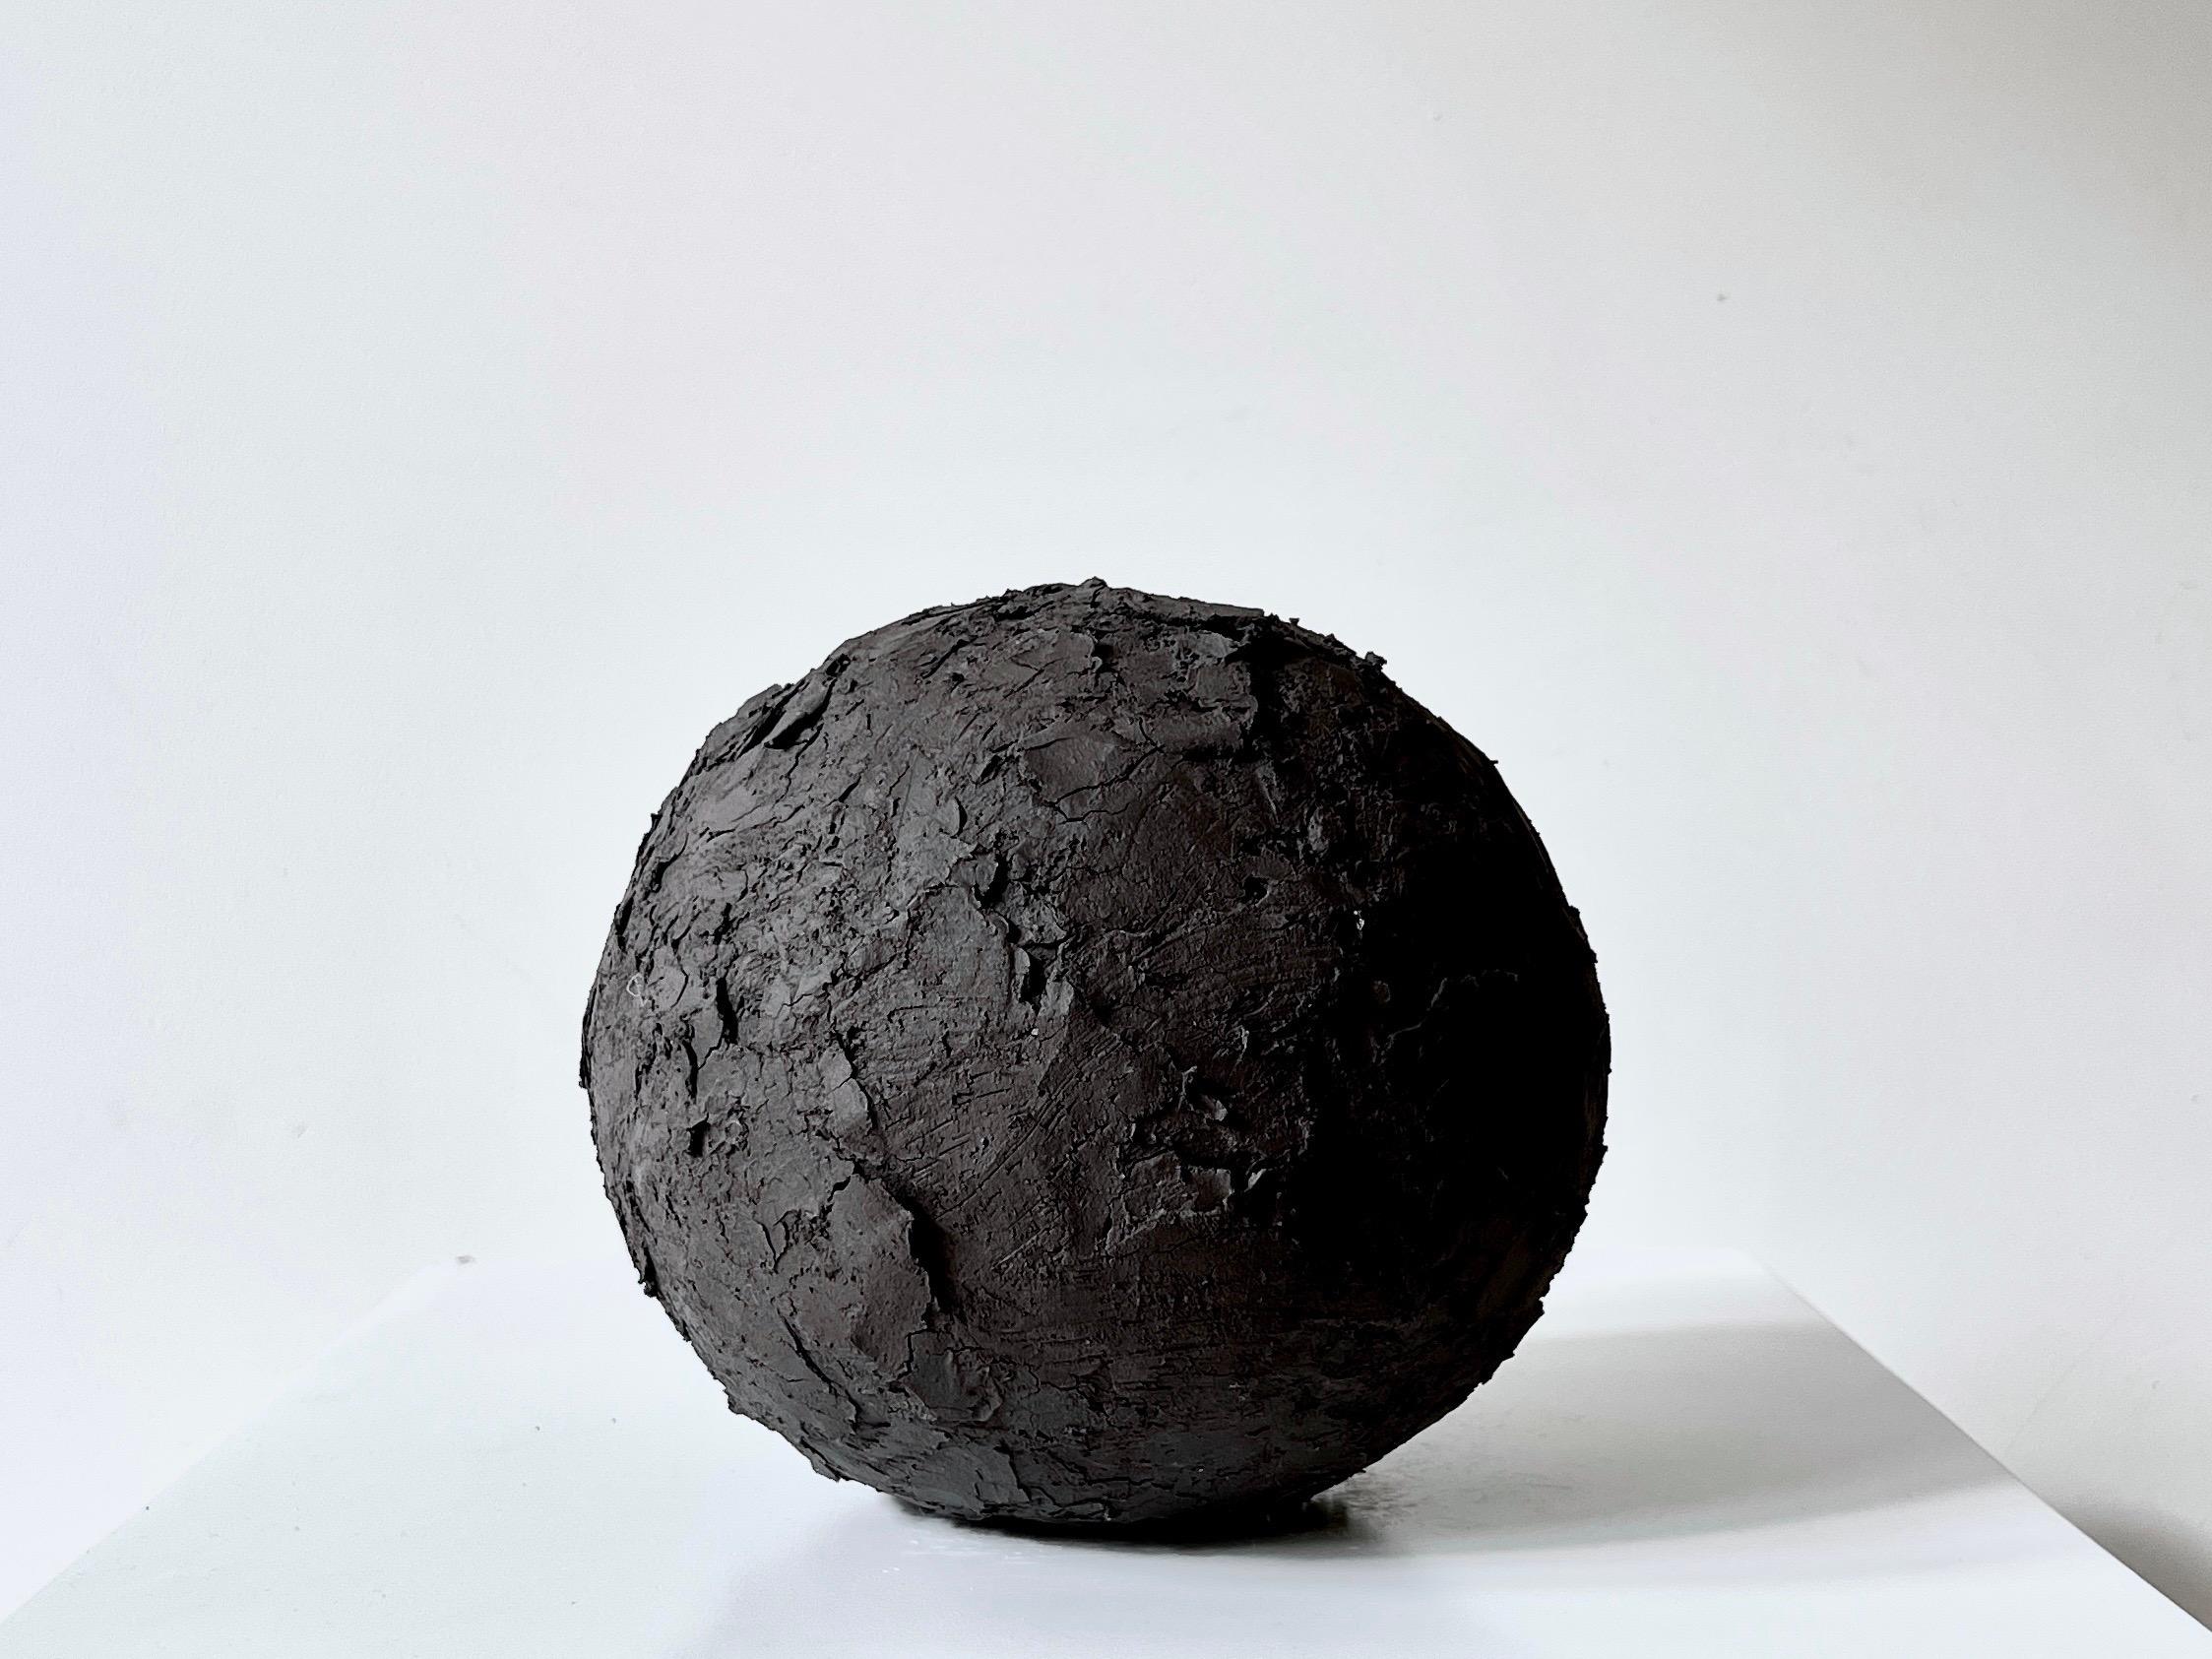 Black Crust sphere II by Laura Pasquino
One of a kind
Dimensions: Ø 18 x H 18 cm
Materials: stoneware ceramic
Finishing: textured stoneware

Laura Pasquino
Incorporating references from ancient Korean ceramics as well as principles of